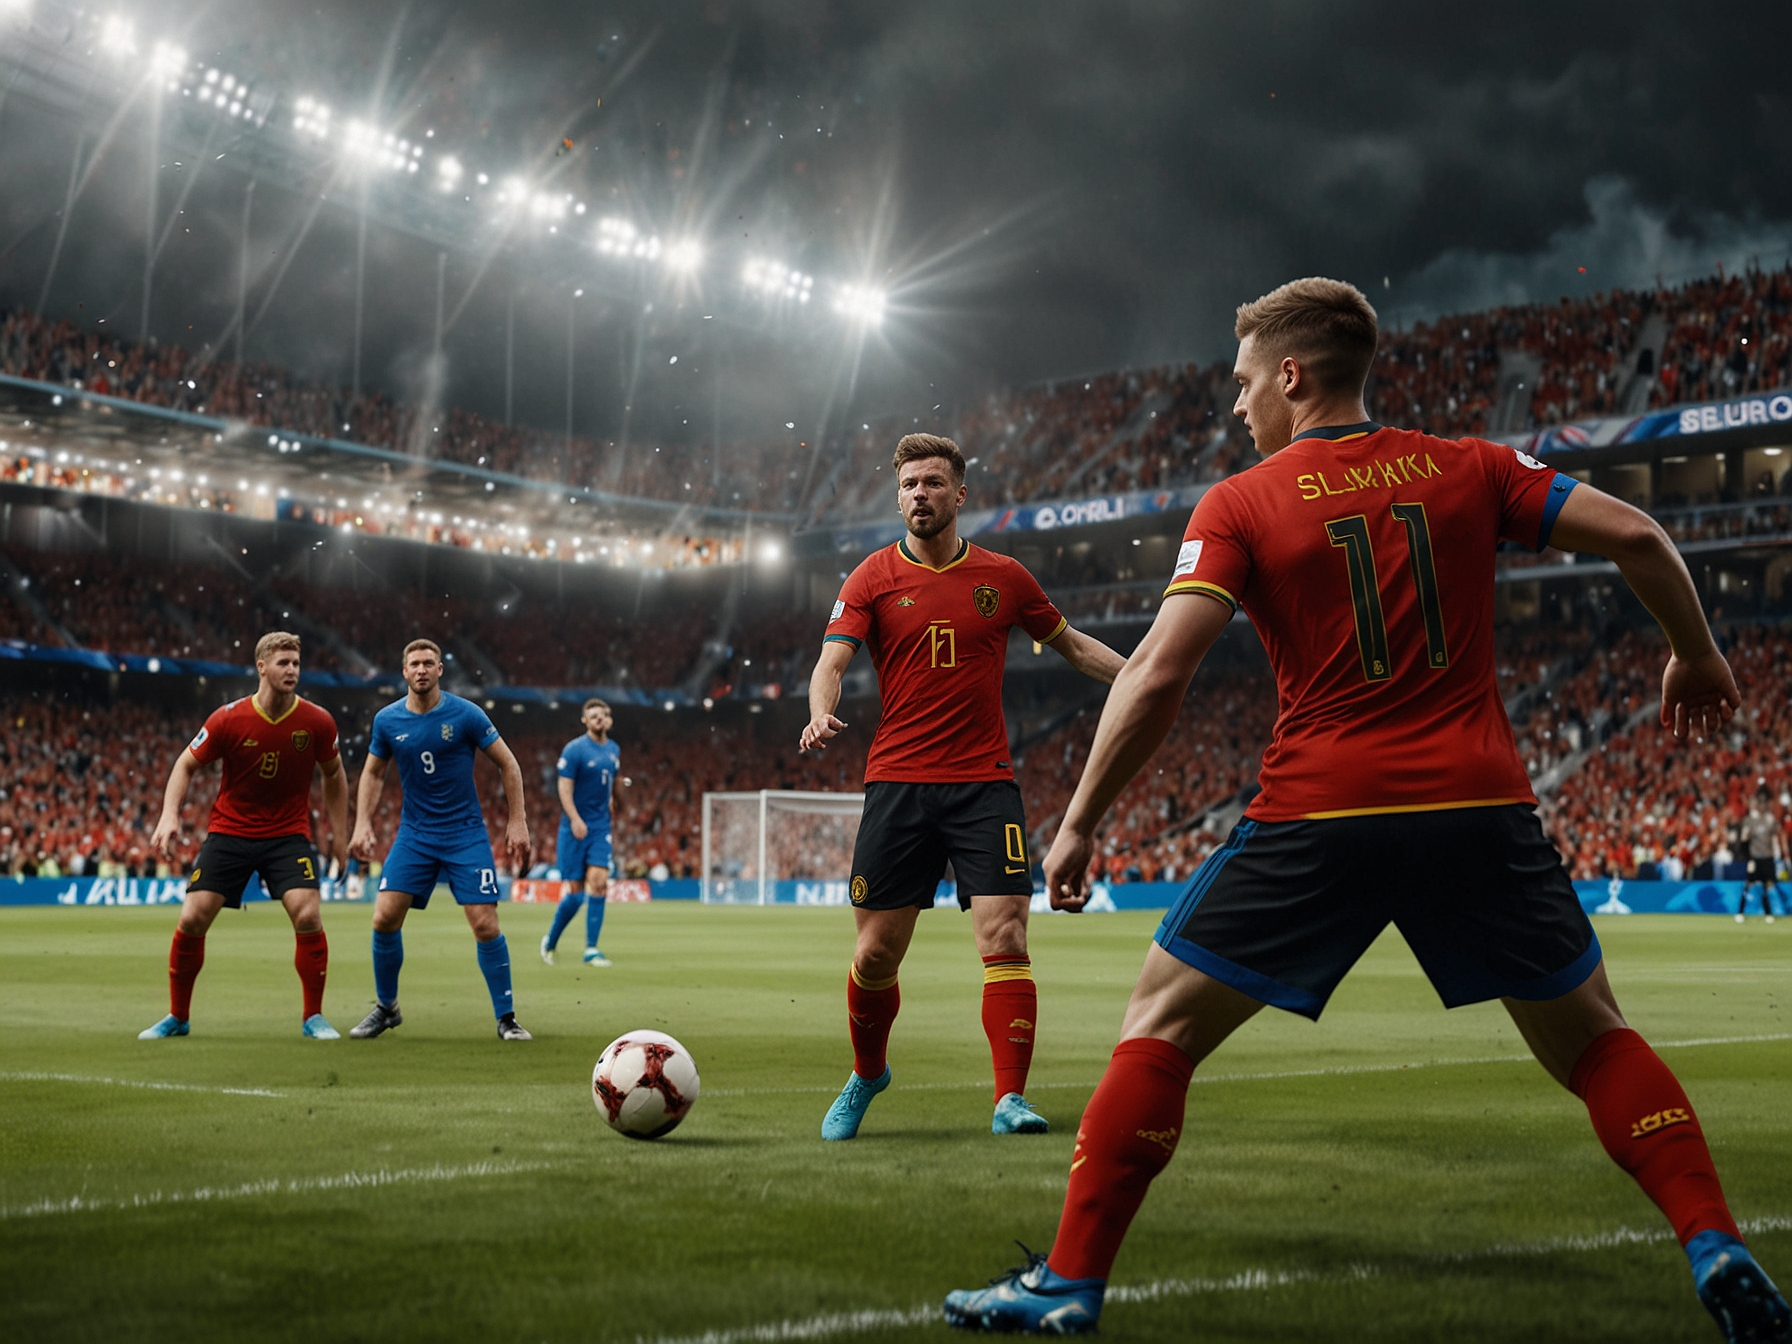 A high-action scene from the Belgium vs Slovakia match at UEFA Euro 2024, capturing Belgium's dynamic attack as key players maneuver past Slovakia's defense effectively.